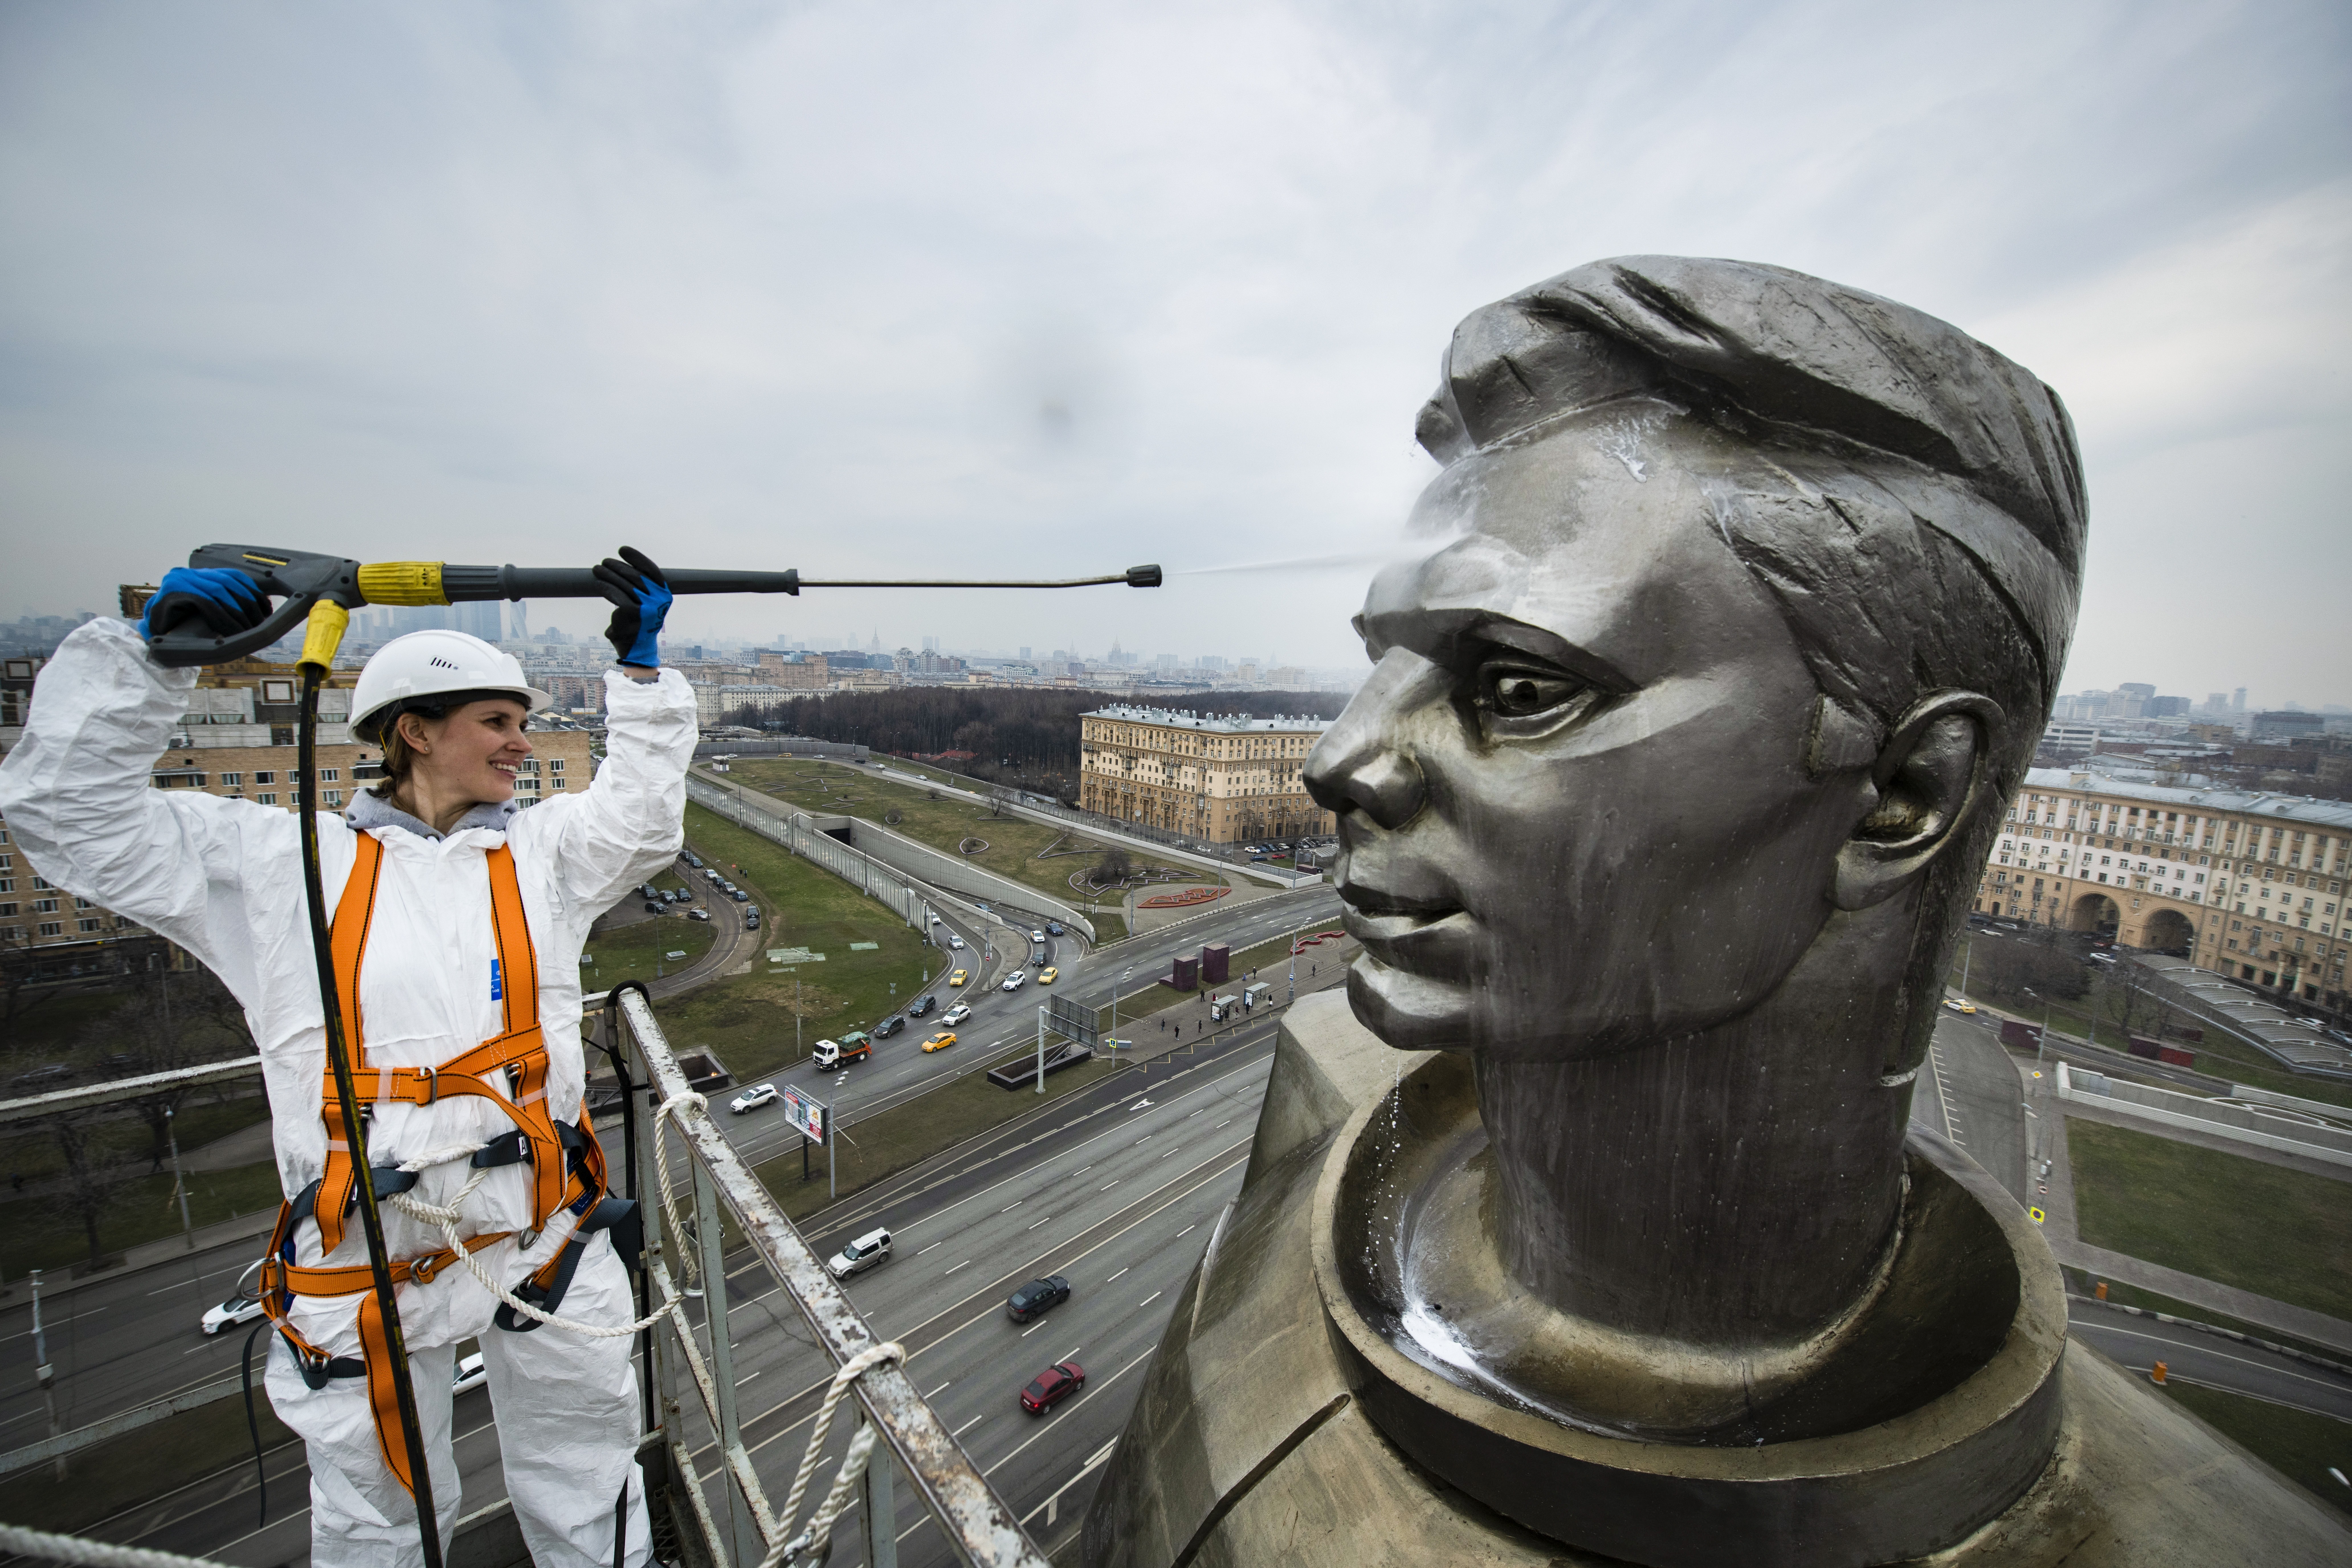 A worker cleans the statue of Yuri Gagarin, the first person who flew to space, ahead of Cosmonautics Day celebrated on April 12, in Moscow, Russia, Wednesday April 10, 2019. Cosmonautics Day marks when Soviet cosmonaut Yuri Gagarin became the first man to fly in space, in 1961, orbiting the earth once before making a safe landing. (AP Photo/Maxim Marmur)